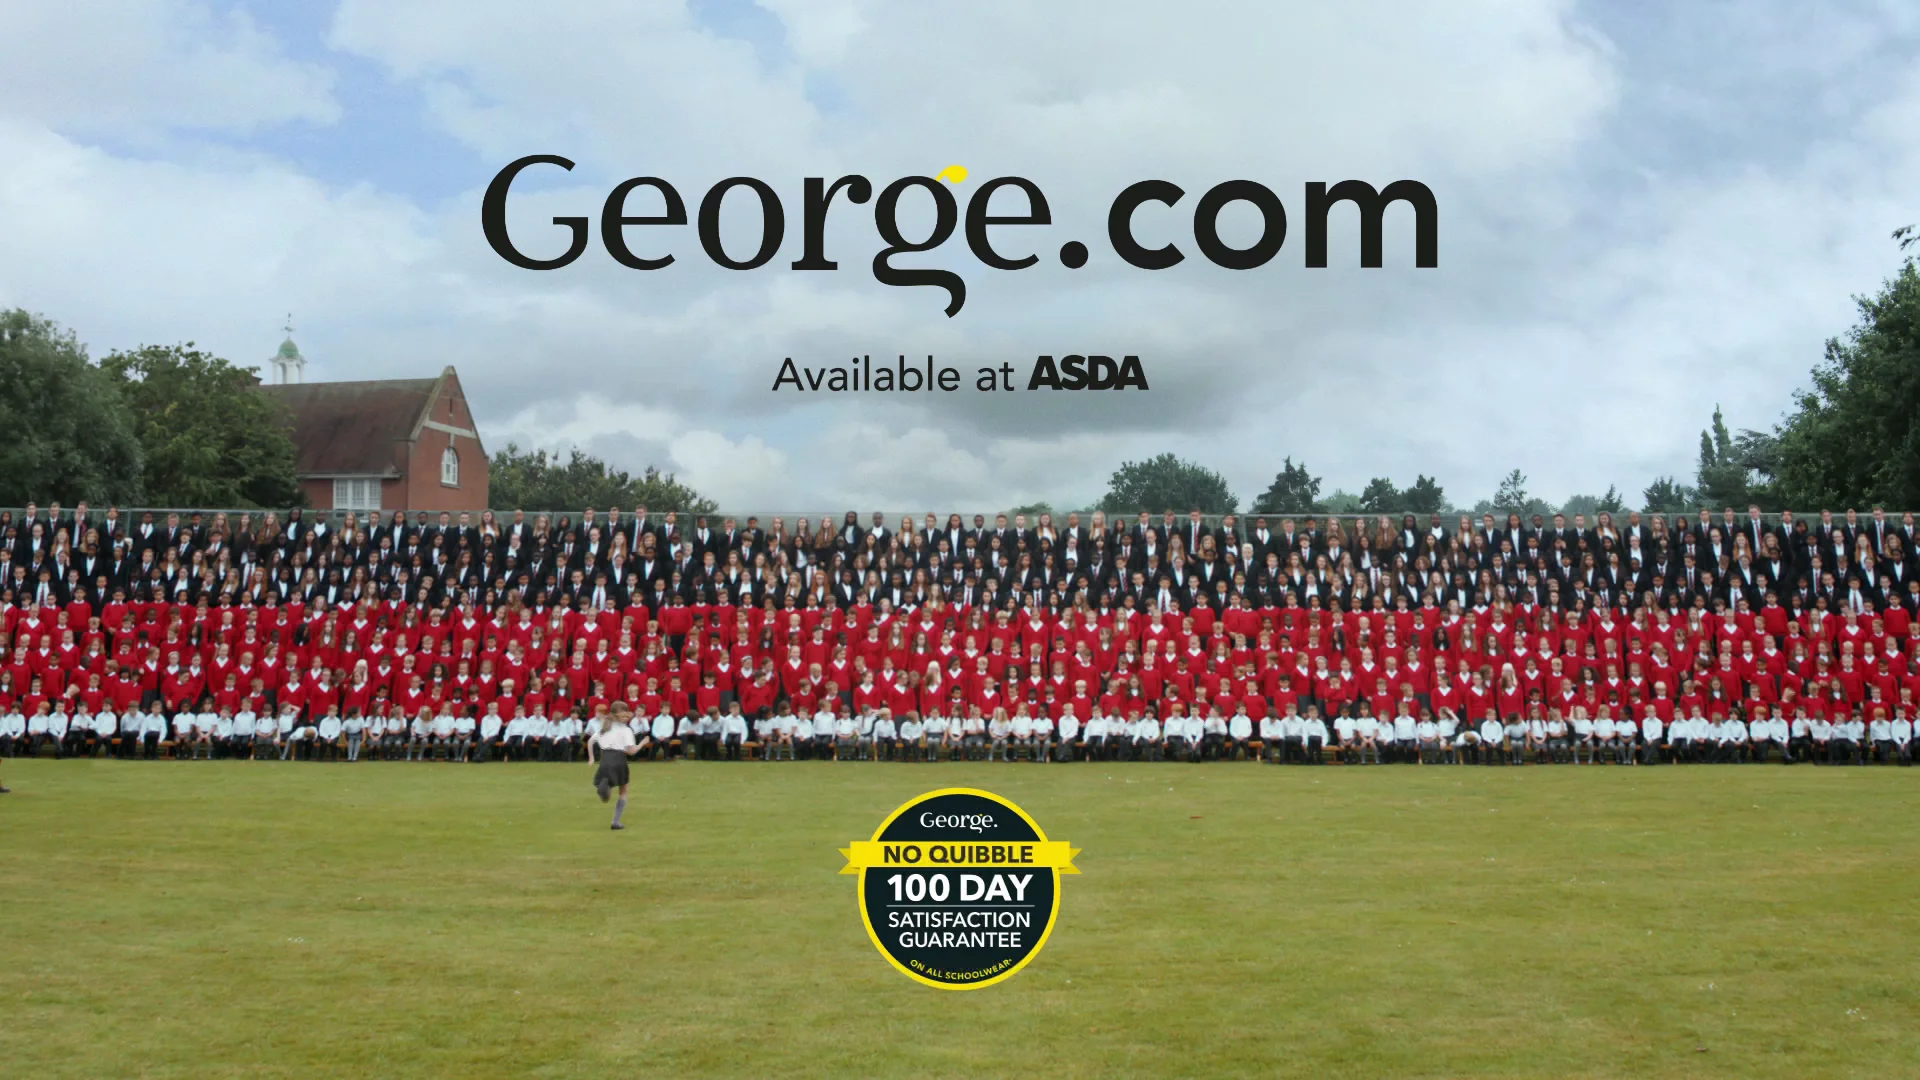 George at ASDA - Uniform For The People on Vimeo